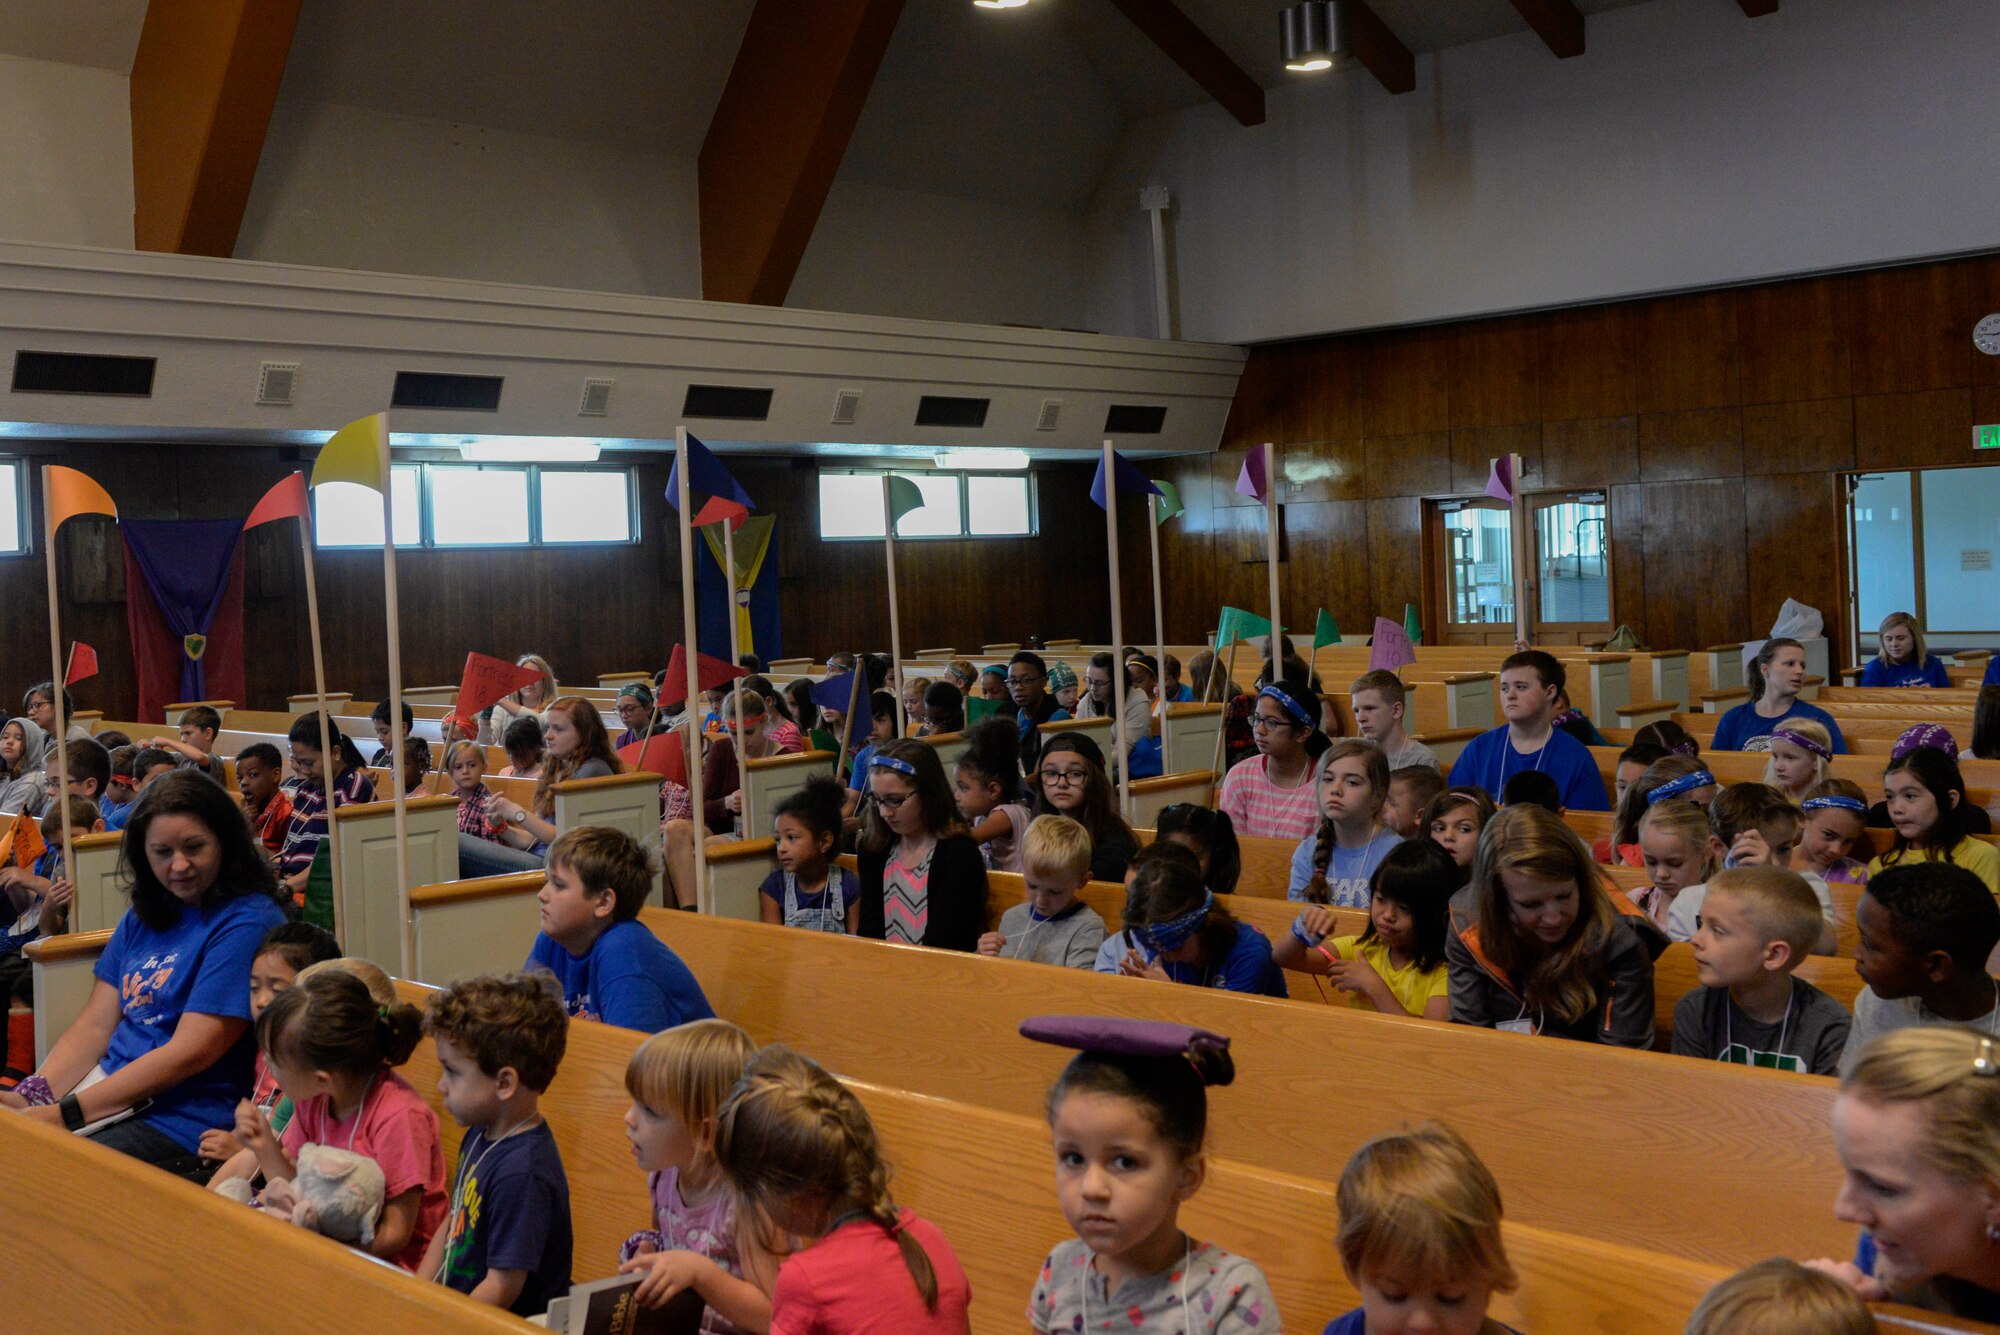 Children and volunteers participate in Yokota’s annual Vacation Bible School at Yokota Air Base, Japan, June 23, 2017. Approximately 150 children gathered in the main chapel annex for the VBS before separating into their teams to participate in various activities such as arts and crafts, storytelling and snack time.